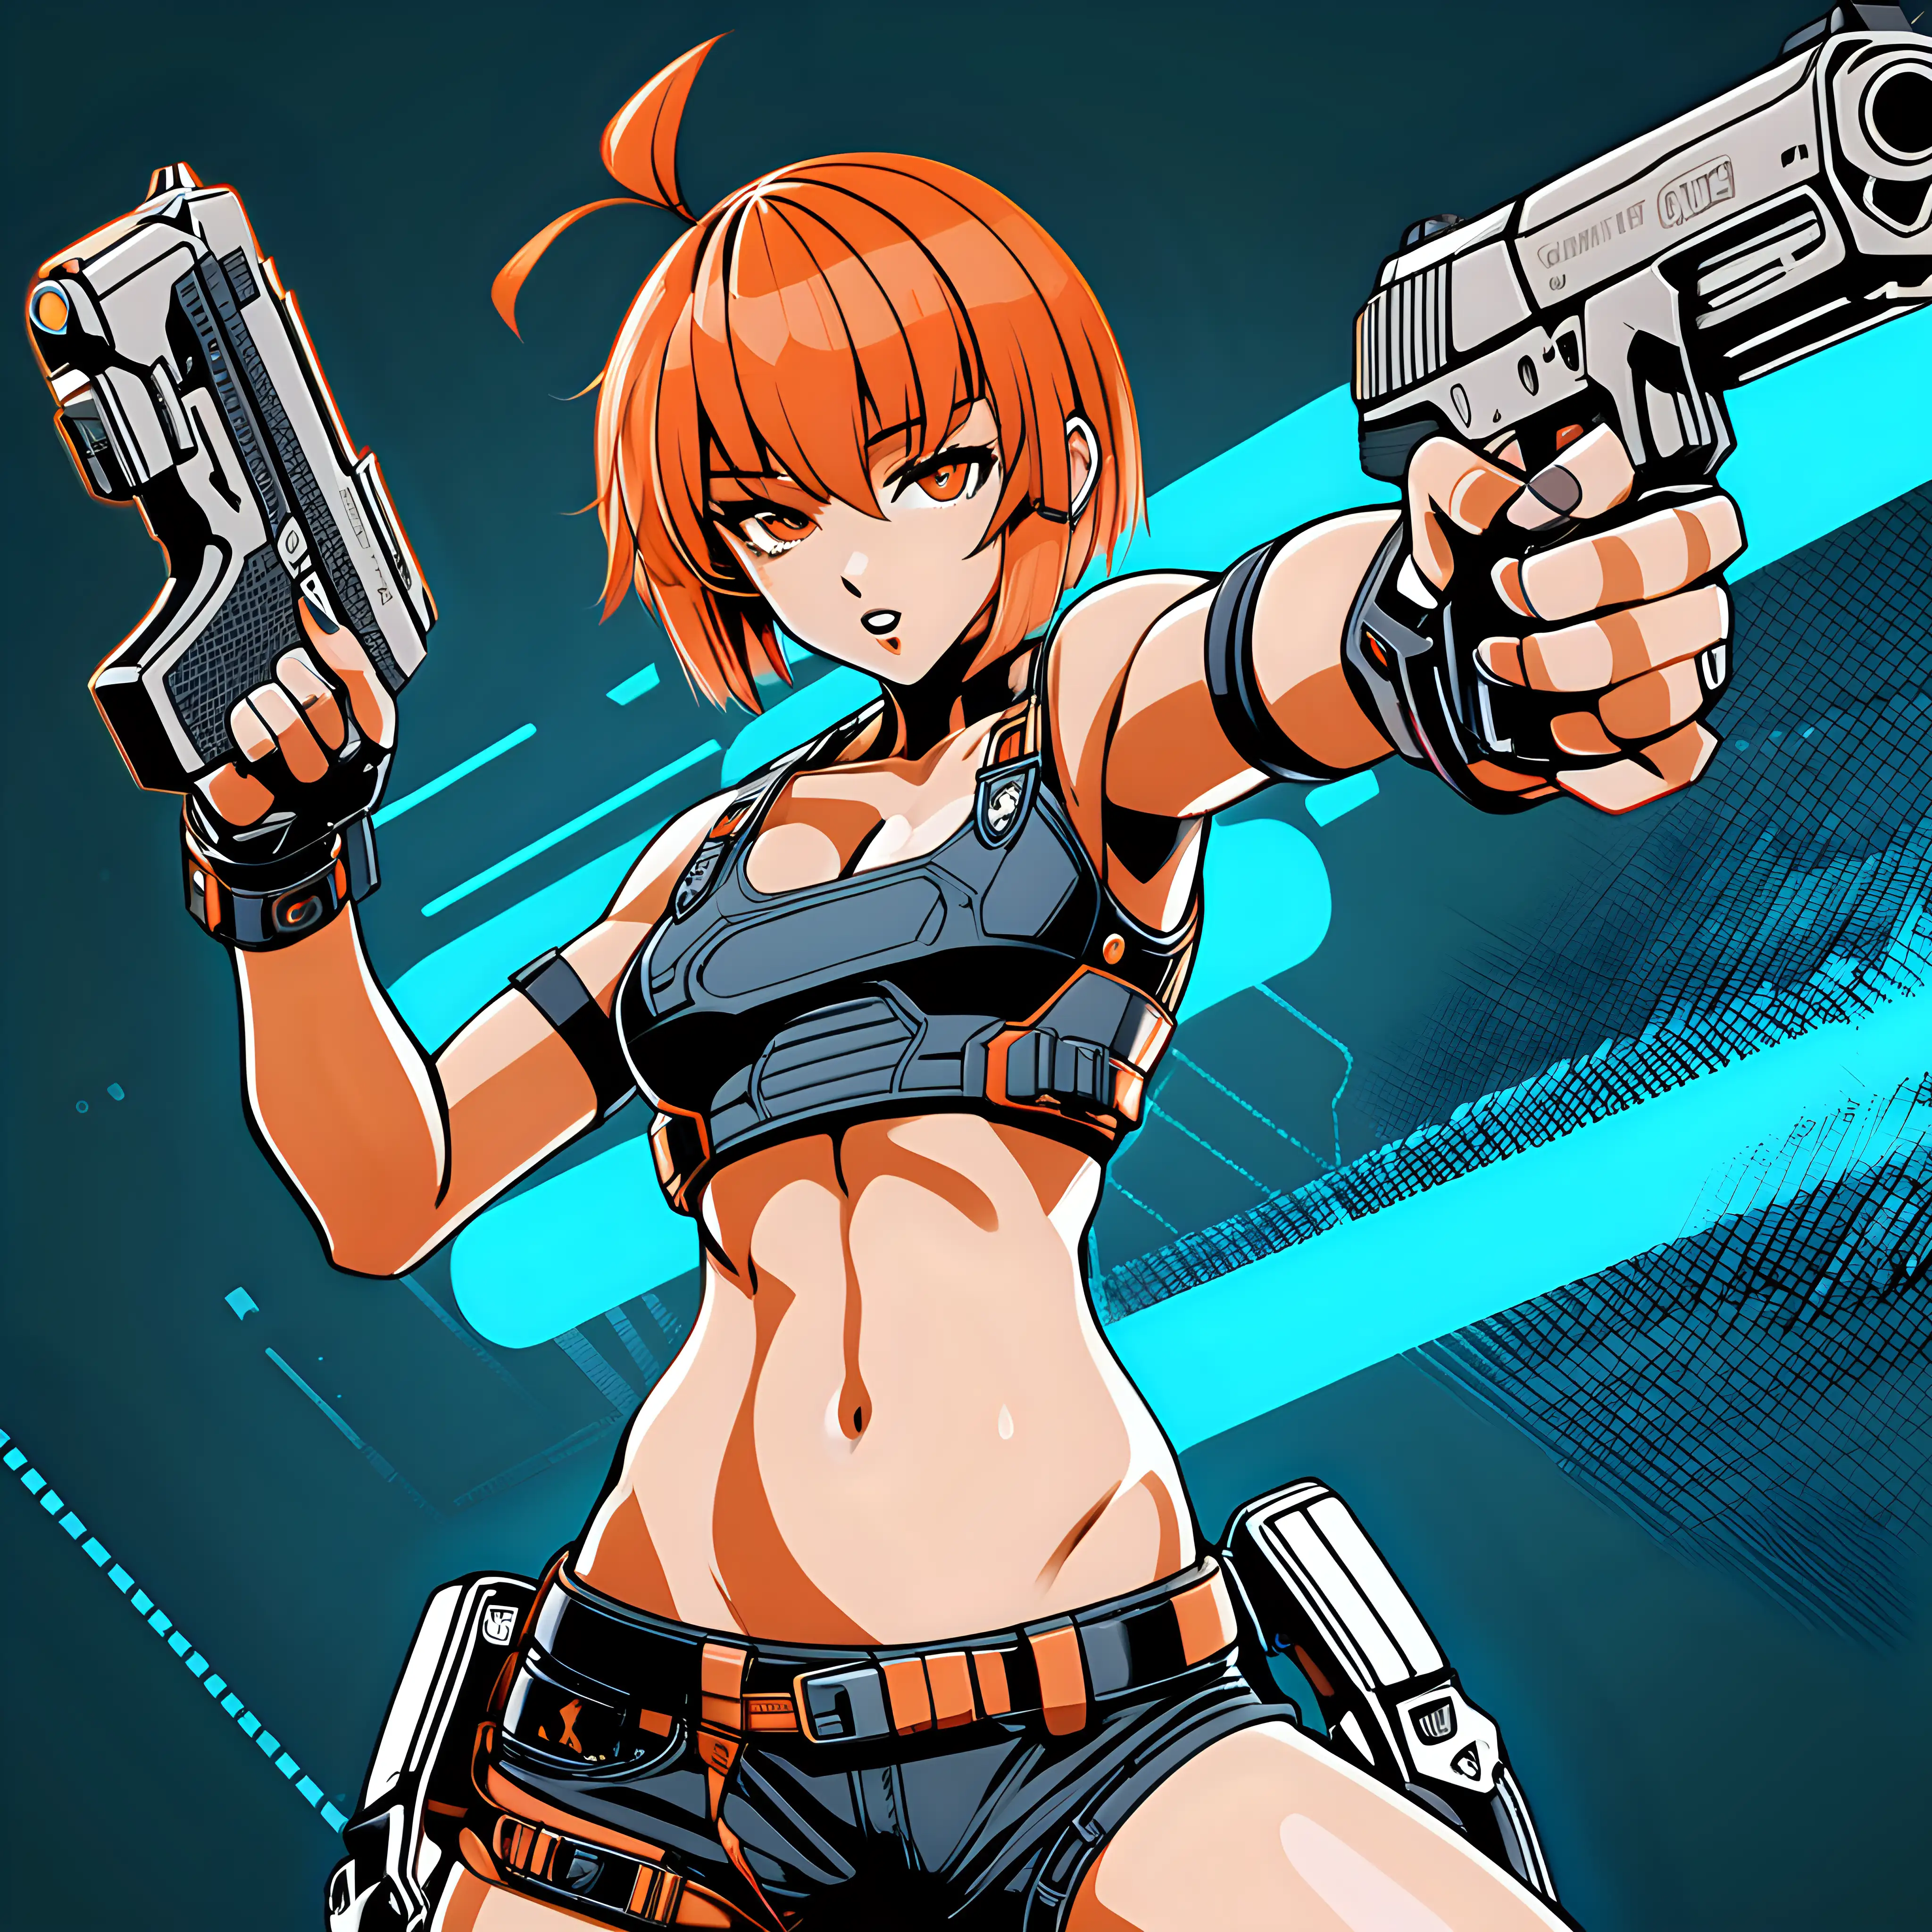 Anime Cyberpunk Girl in Action with Futuristic Weapon